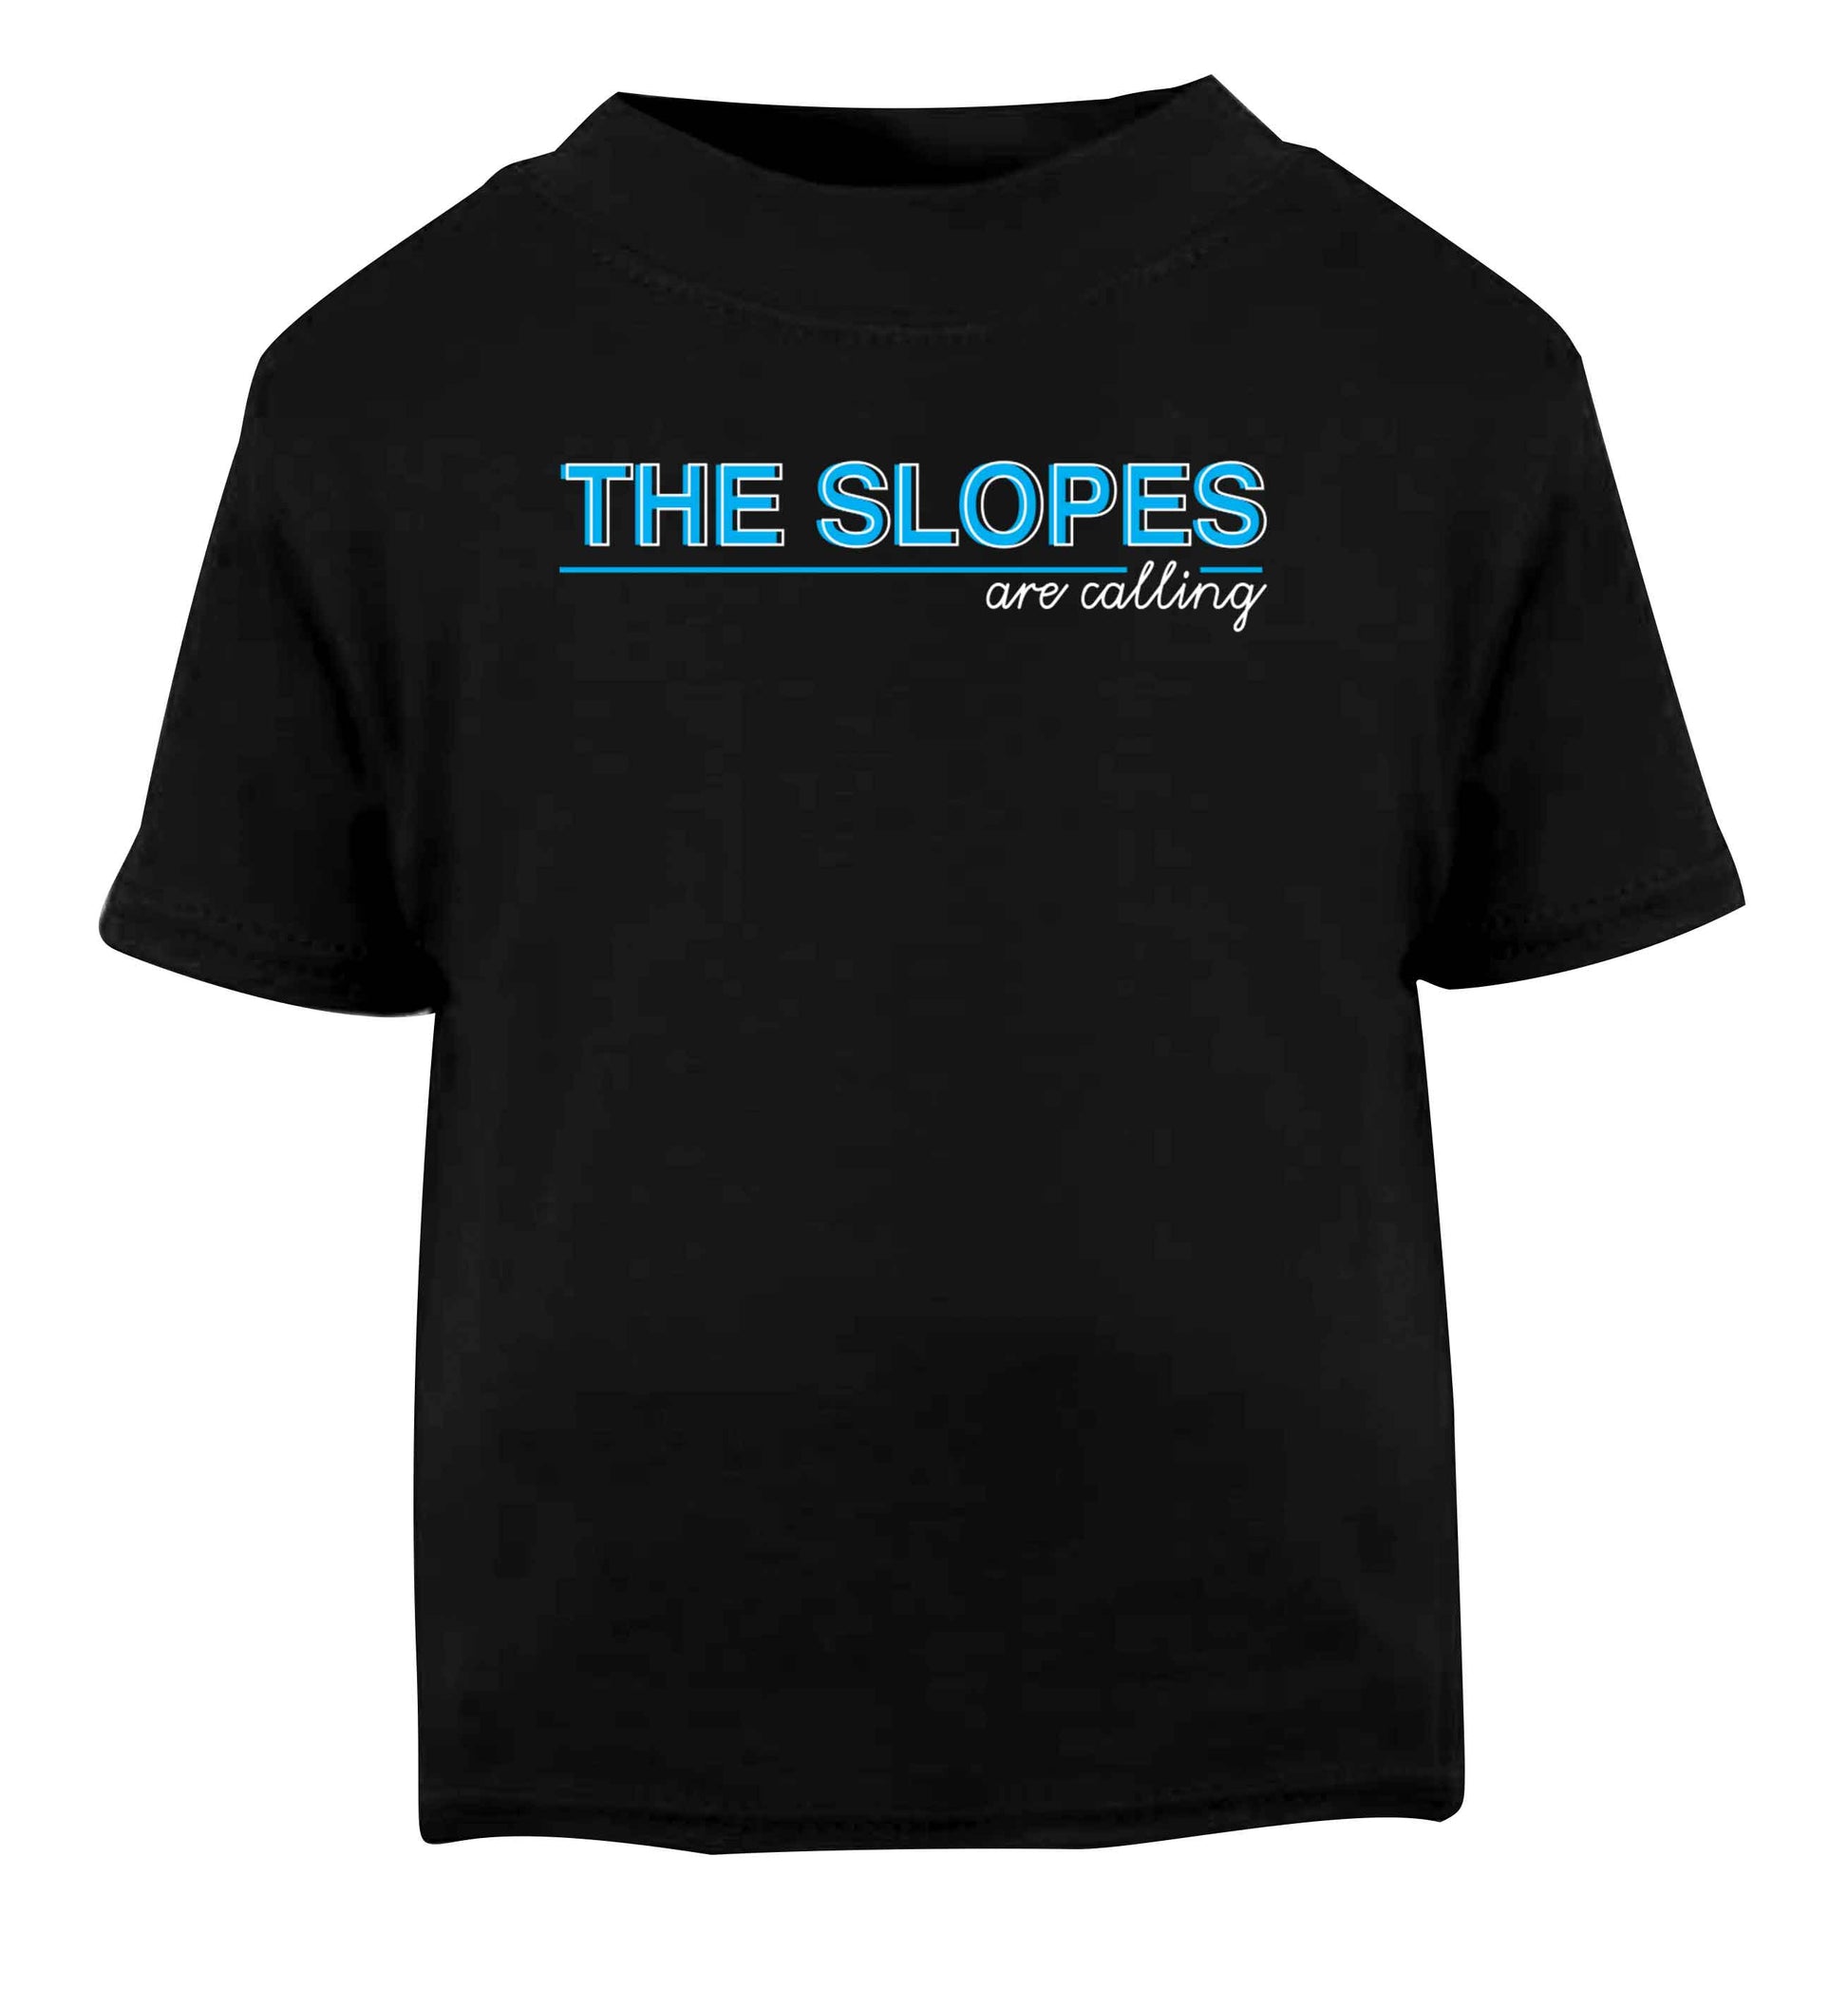 The slopes are calling Black Baby Toddler Tshirt 2 years